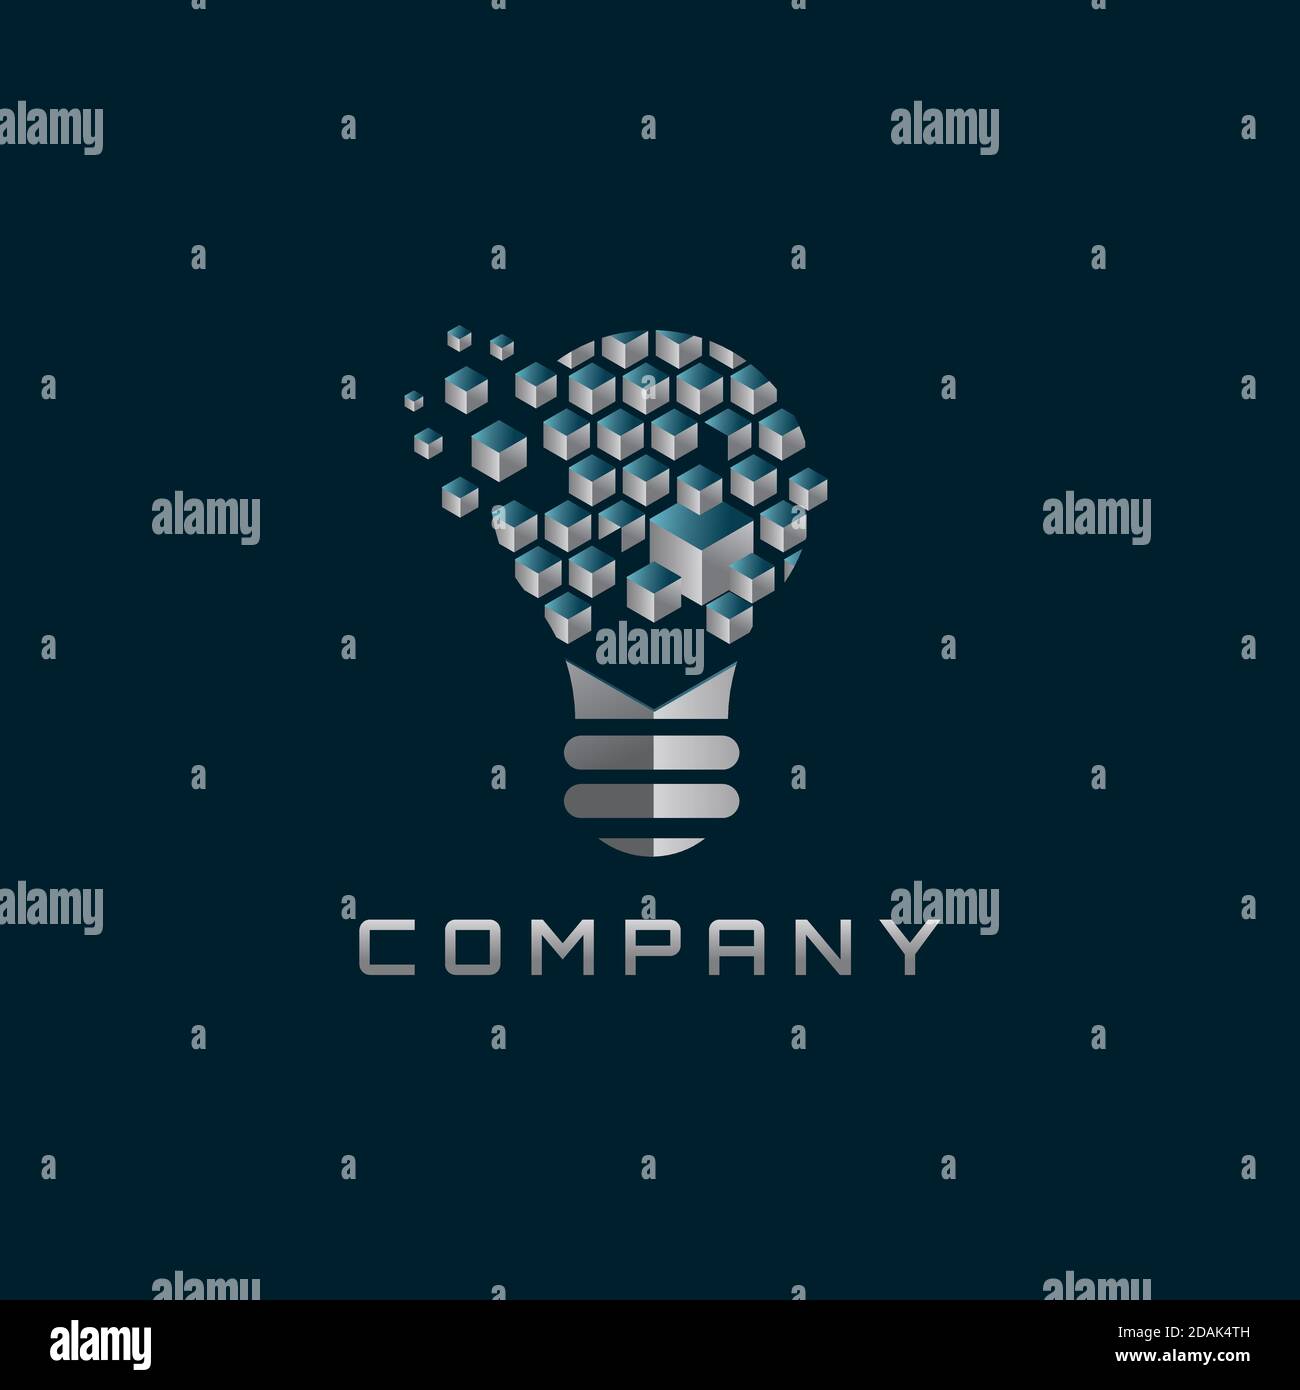 Light bulb composed of cubes vector illustration. Light bulb logo vector. Light bulb emblem Stock Vector